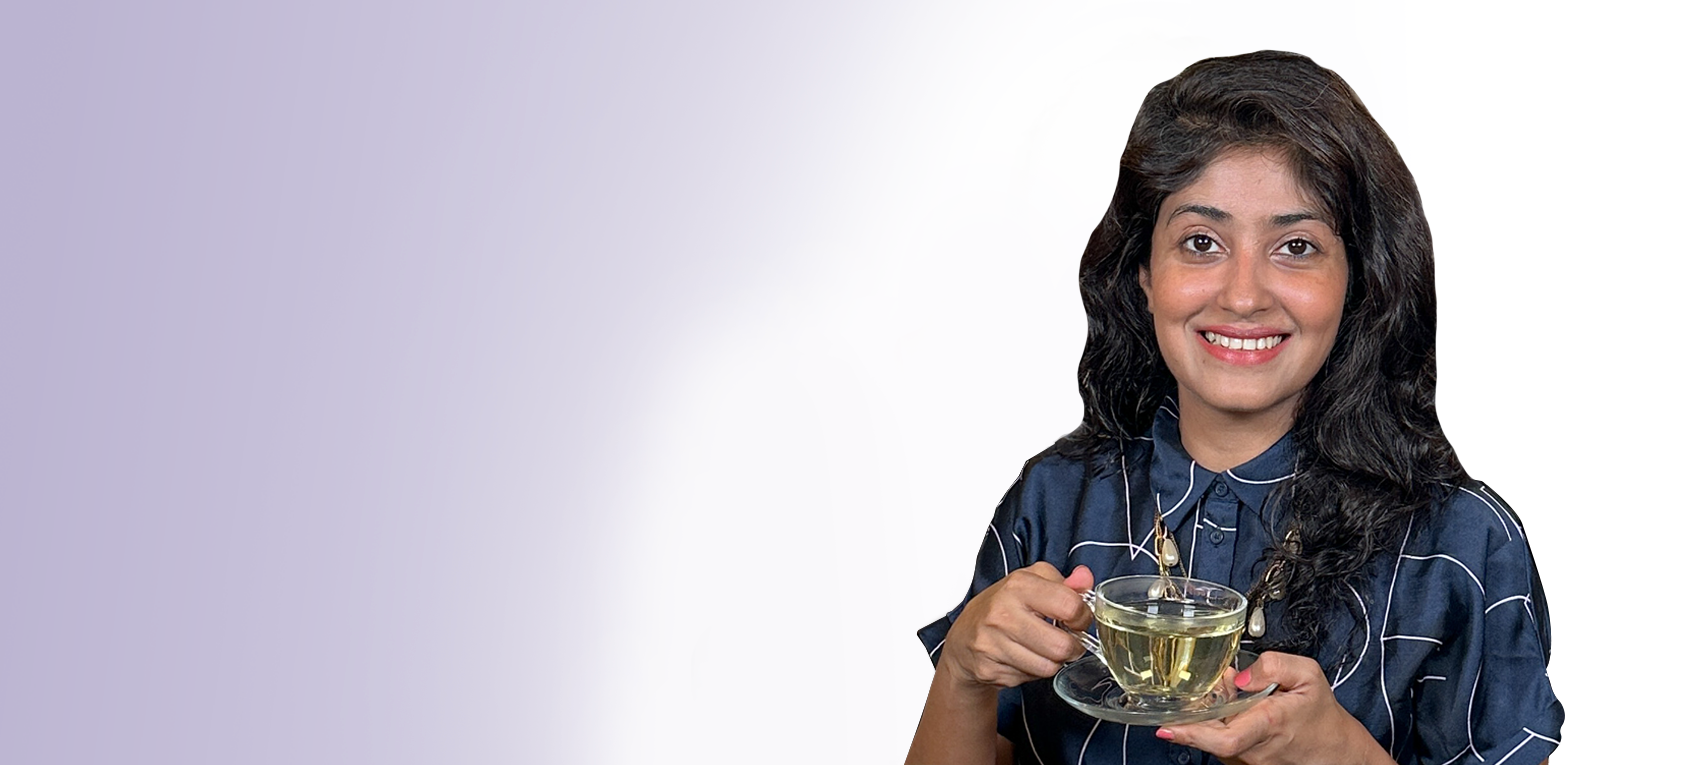 Brewing this Caffeine-free tea with Snigdha Manchanda, India's First Certified Tea Sommelier